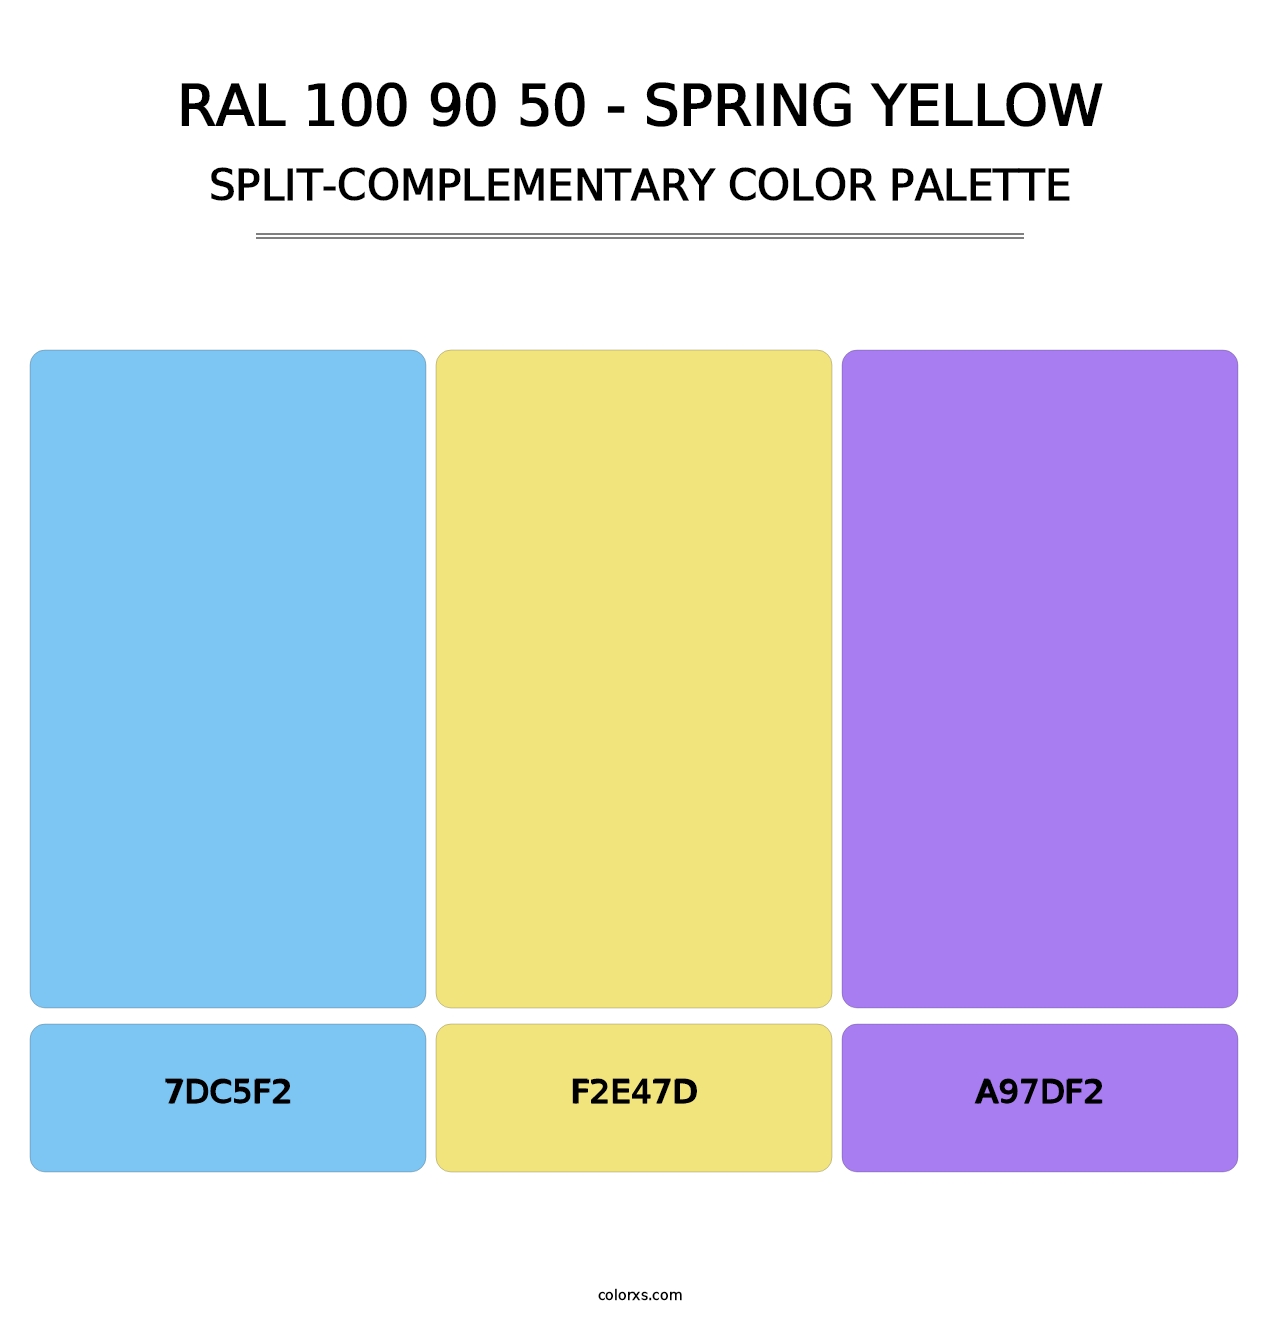 RAL 100 90 50 - Spring Yellow - Split-Complementary Color Palette